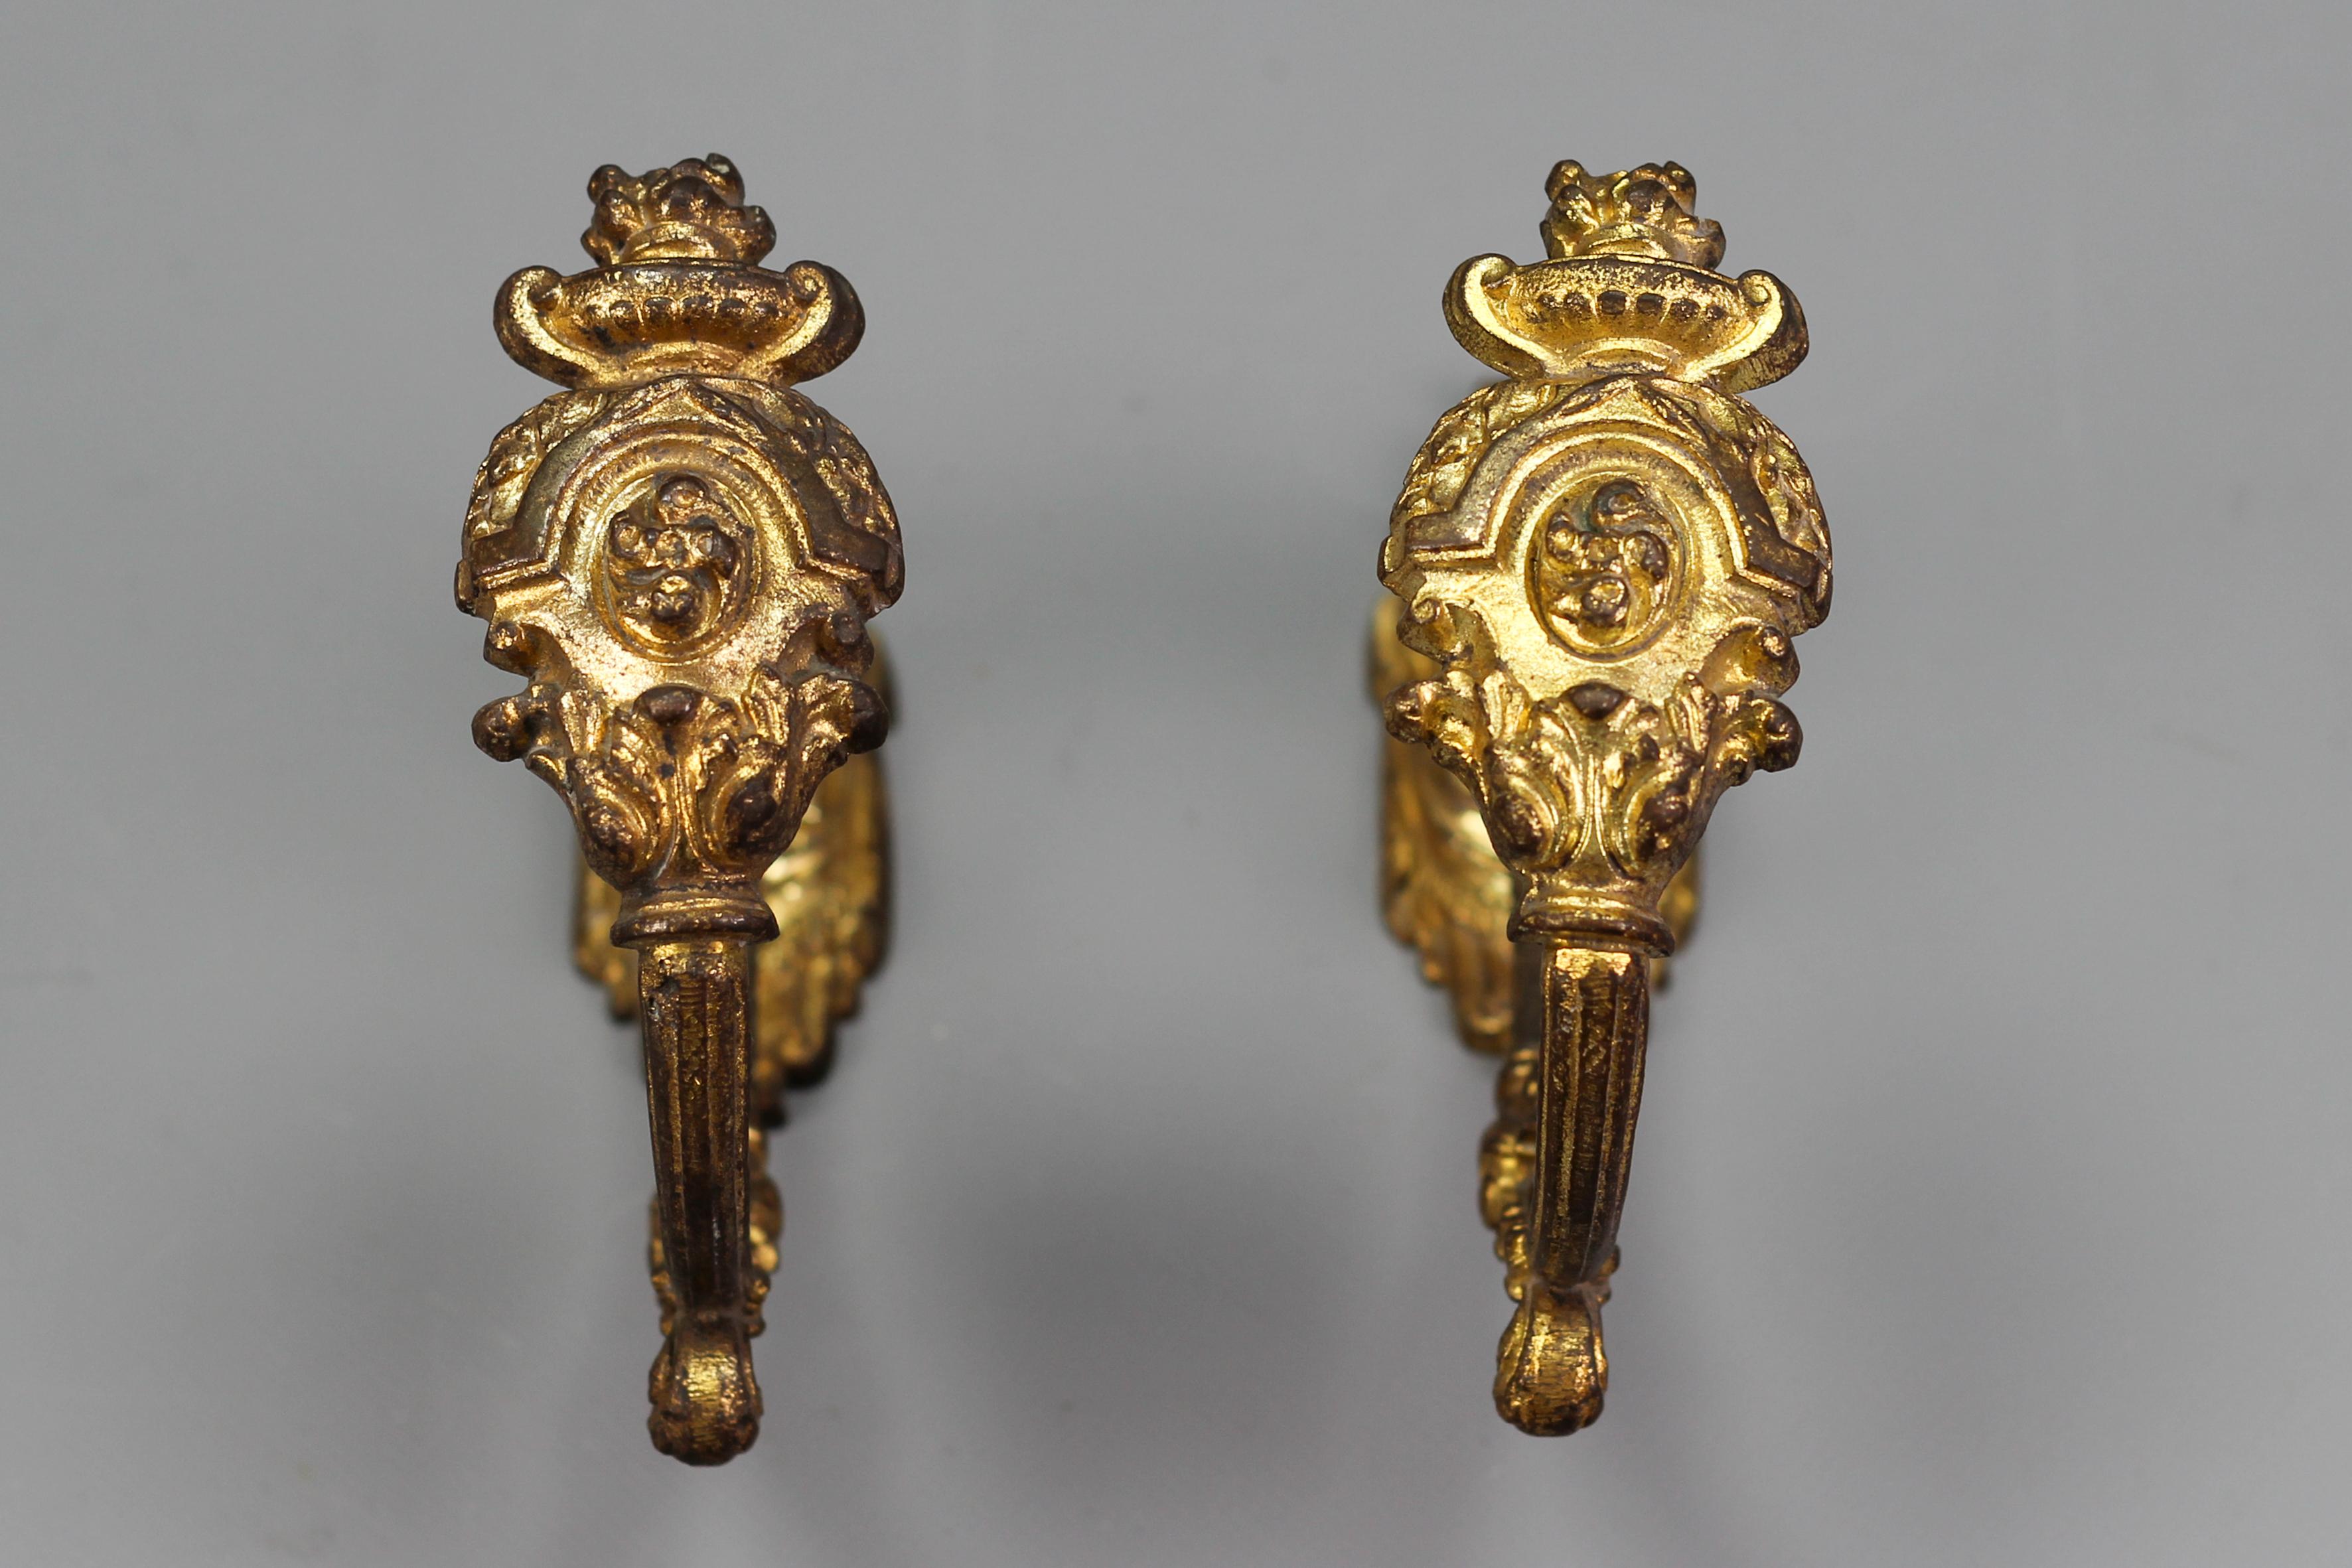 Early 20th Century Pair of French Neoclassical Style Bronze Curtain Tiebacks or Curtain Holders